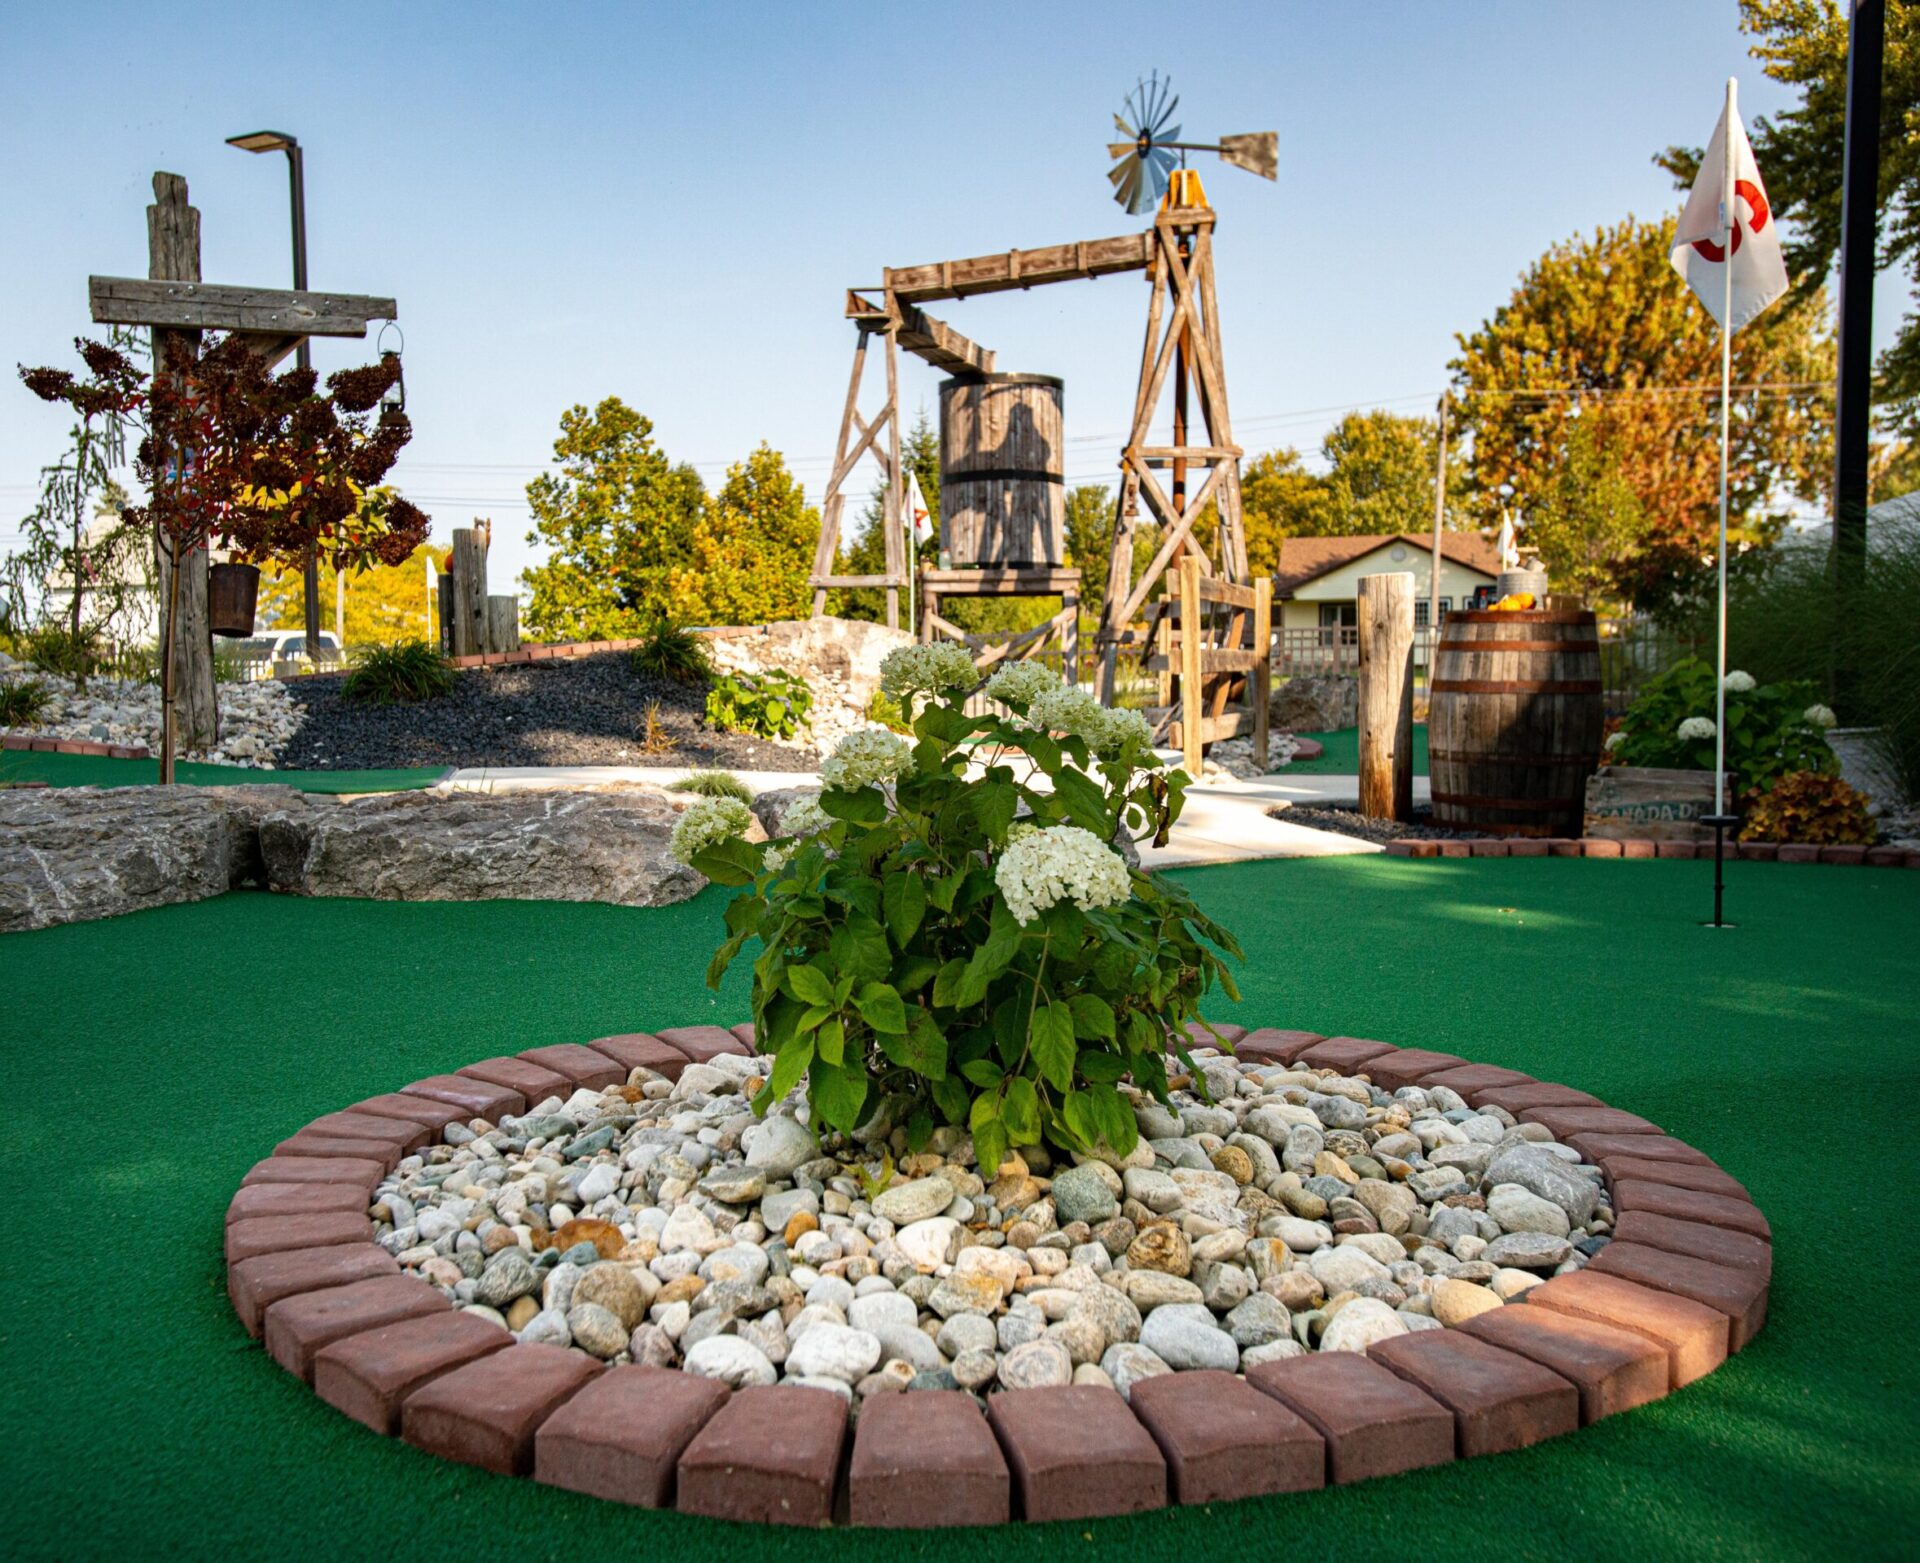 A vibrant miniature golf course with a rustic theme, featuring a windmill, barrels, and decorative greenery under a clear blue sky.